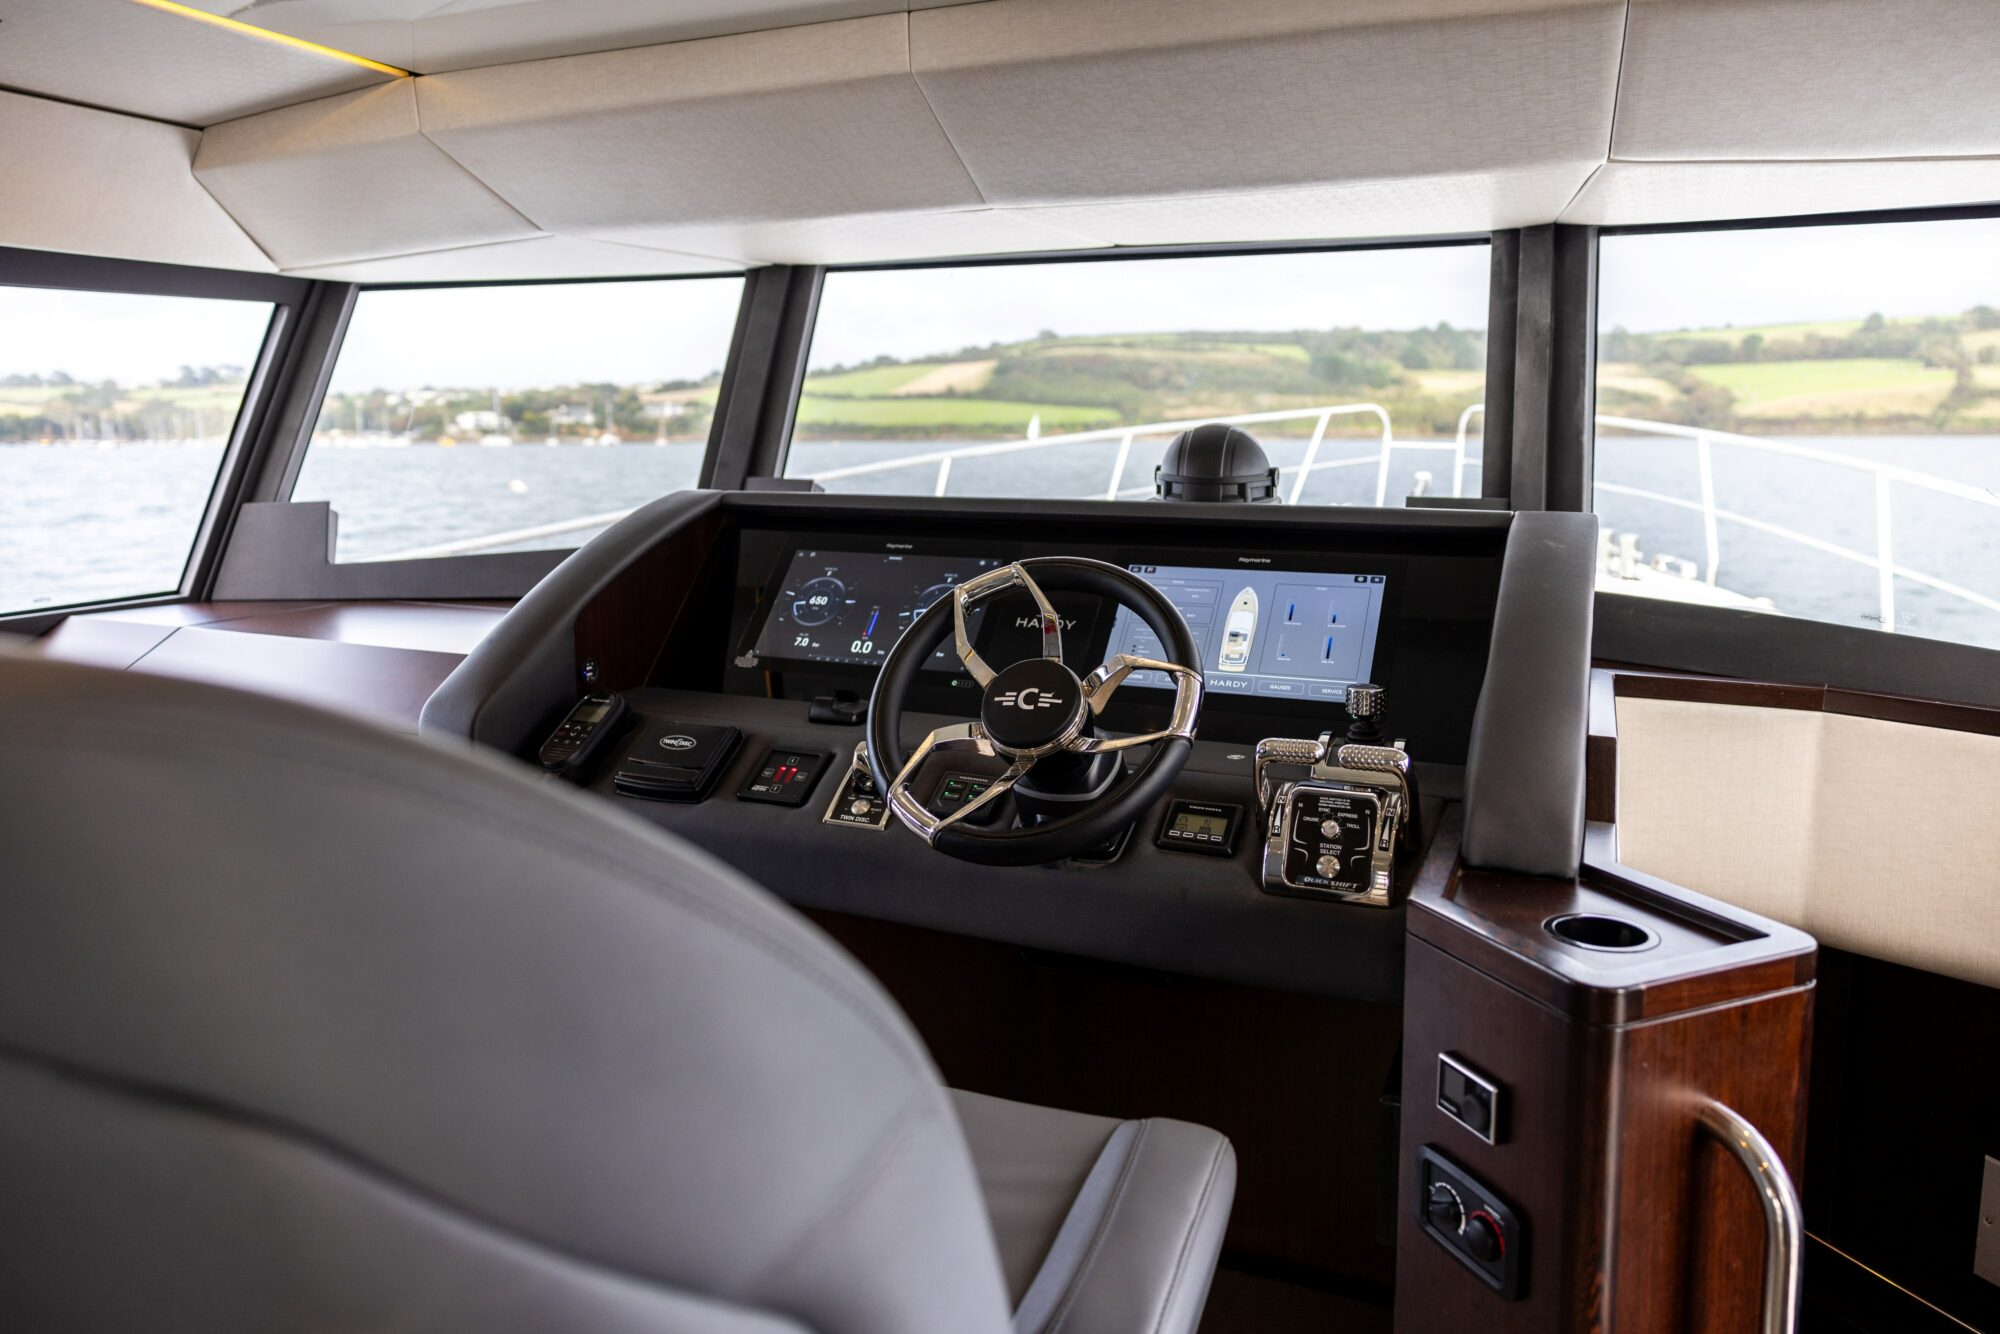 The interior helm console on the Hardy 50DS.